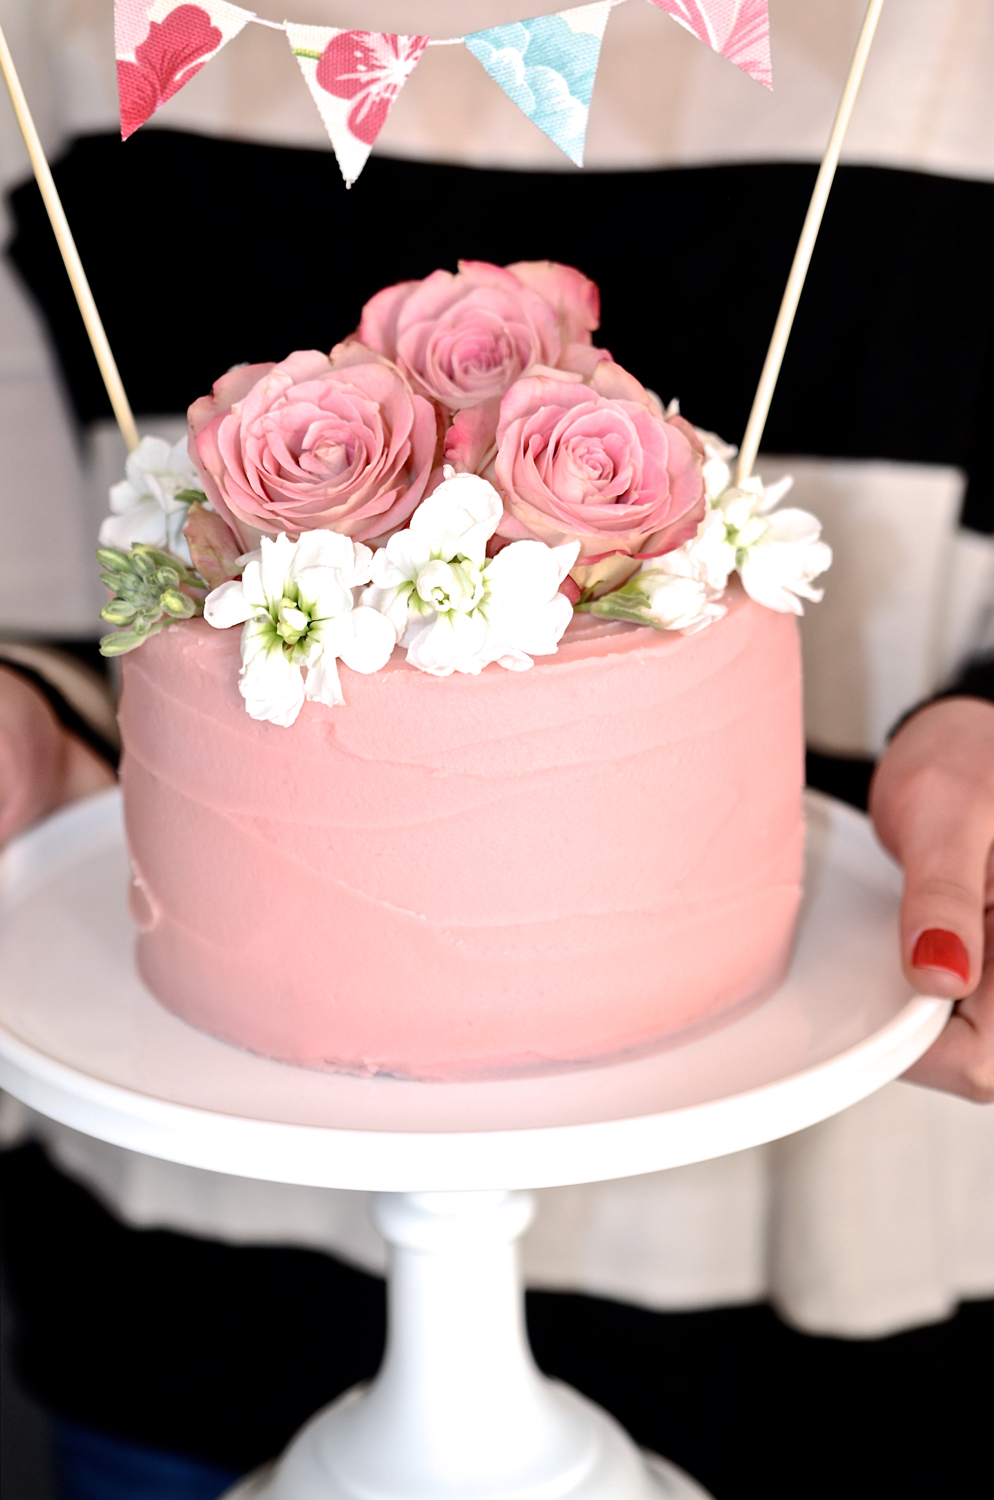 Raspberry vanilla cake with buttercream frosting | Cake Friday recipes